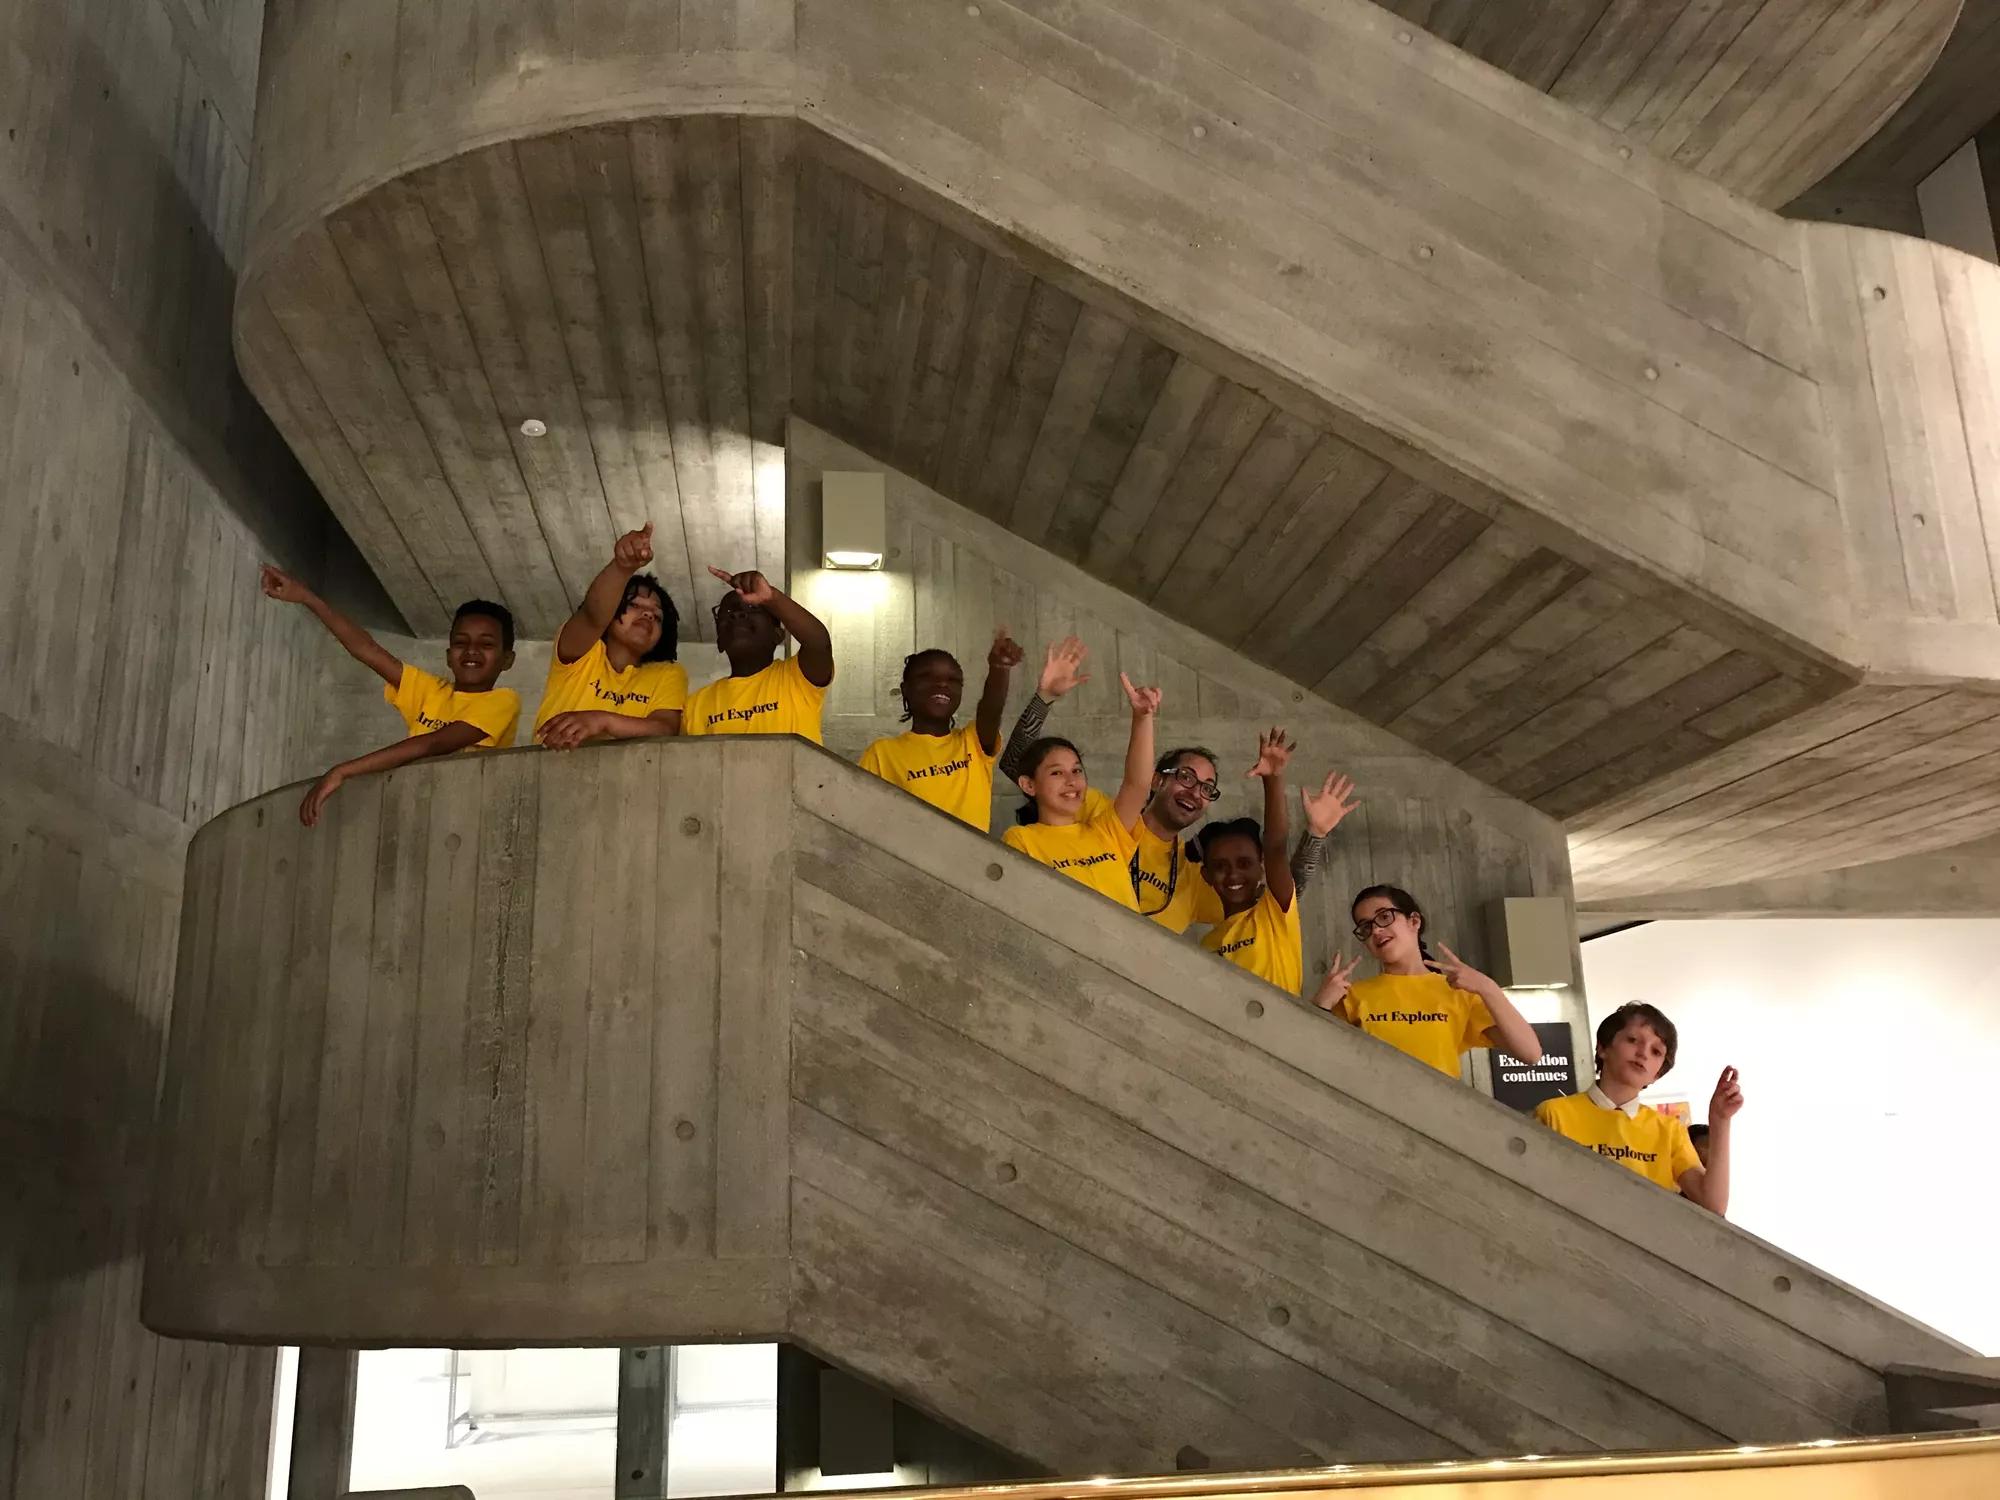 Children standing and waving on a concrete staircase